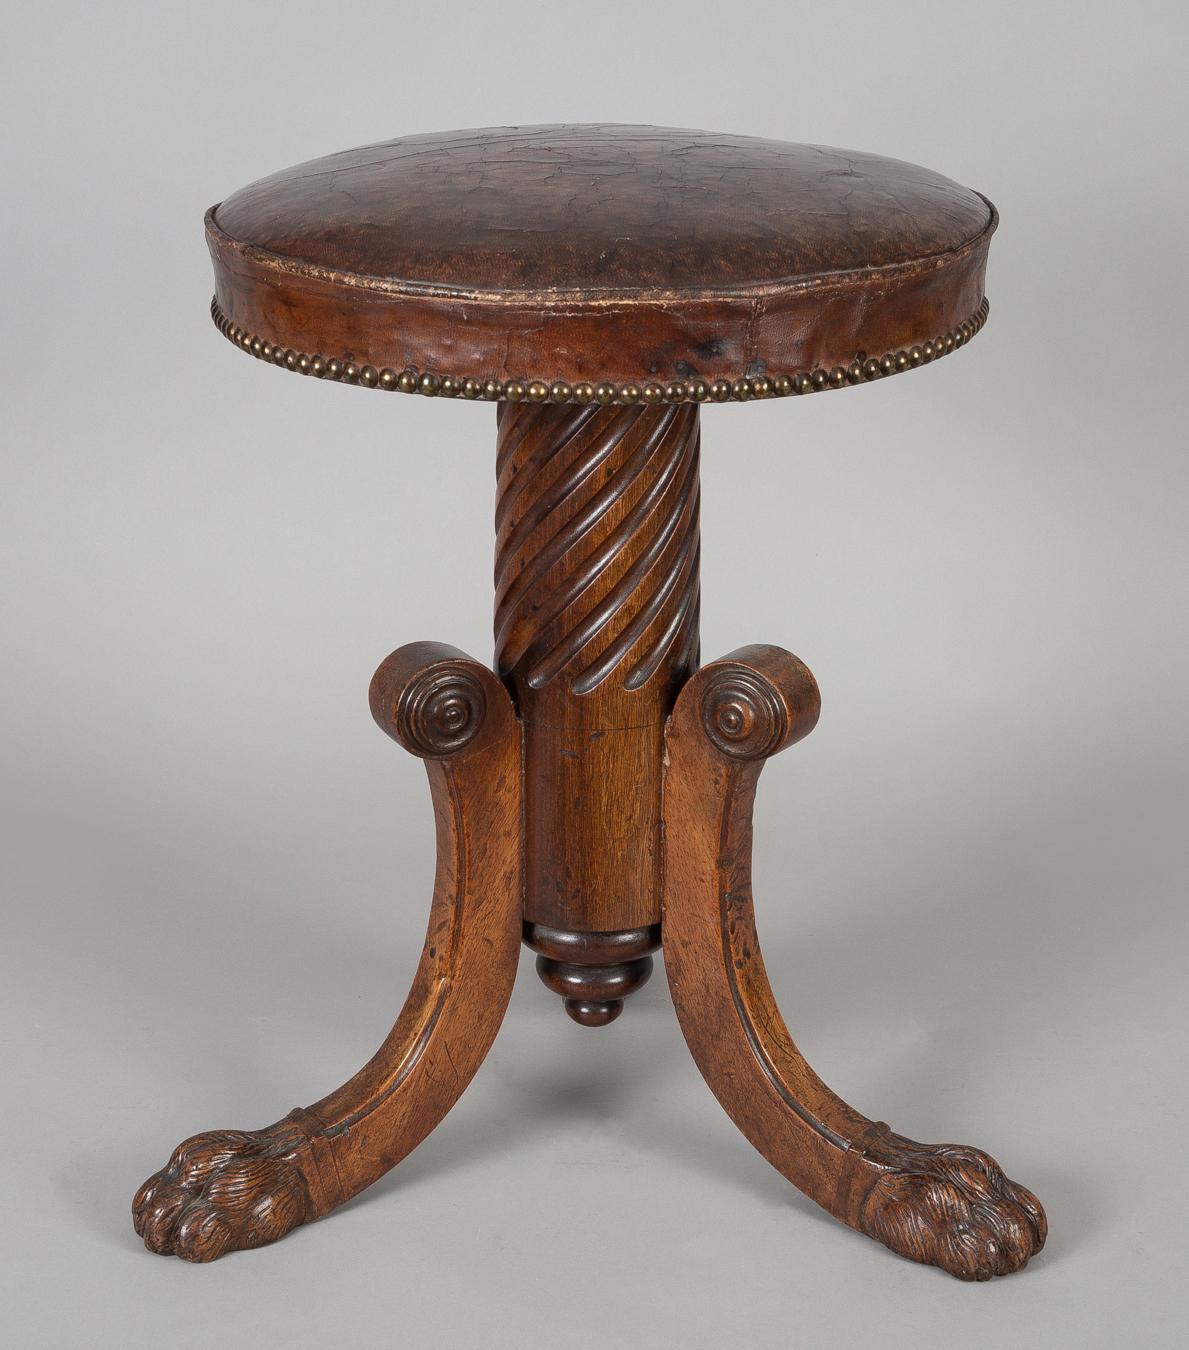 Carved English Antique Regency Revolving Piano Stool For Sale